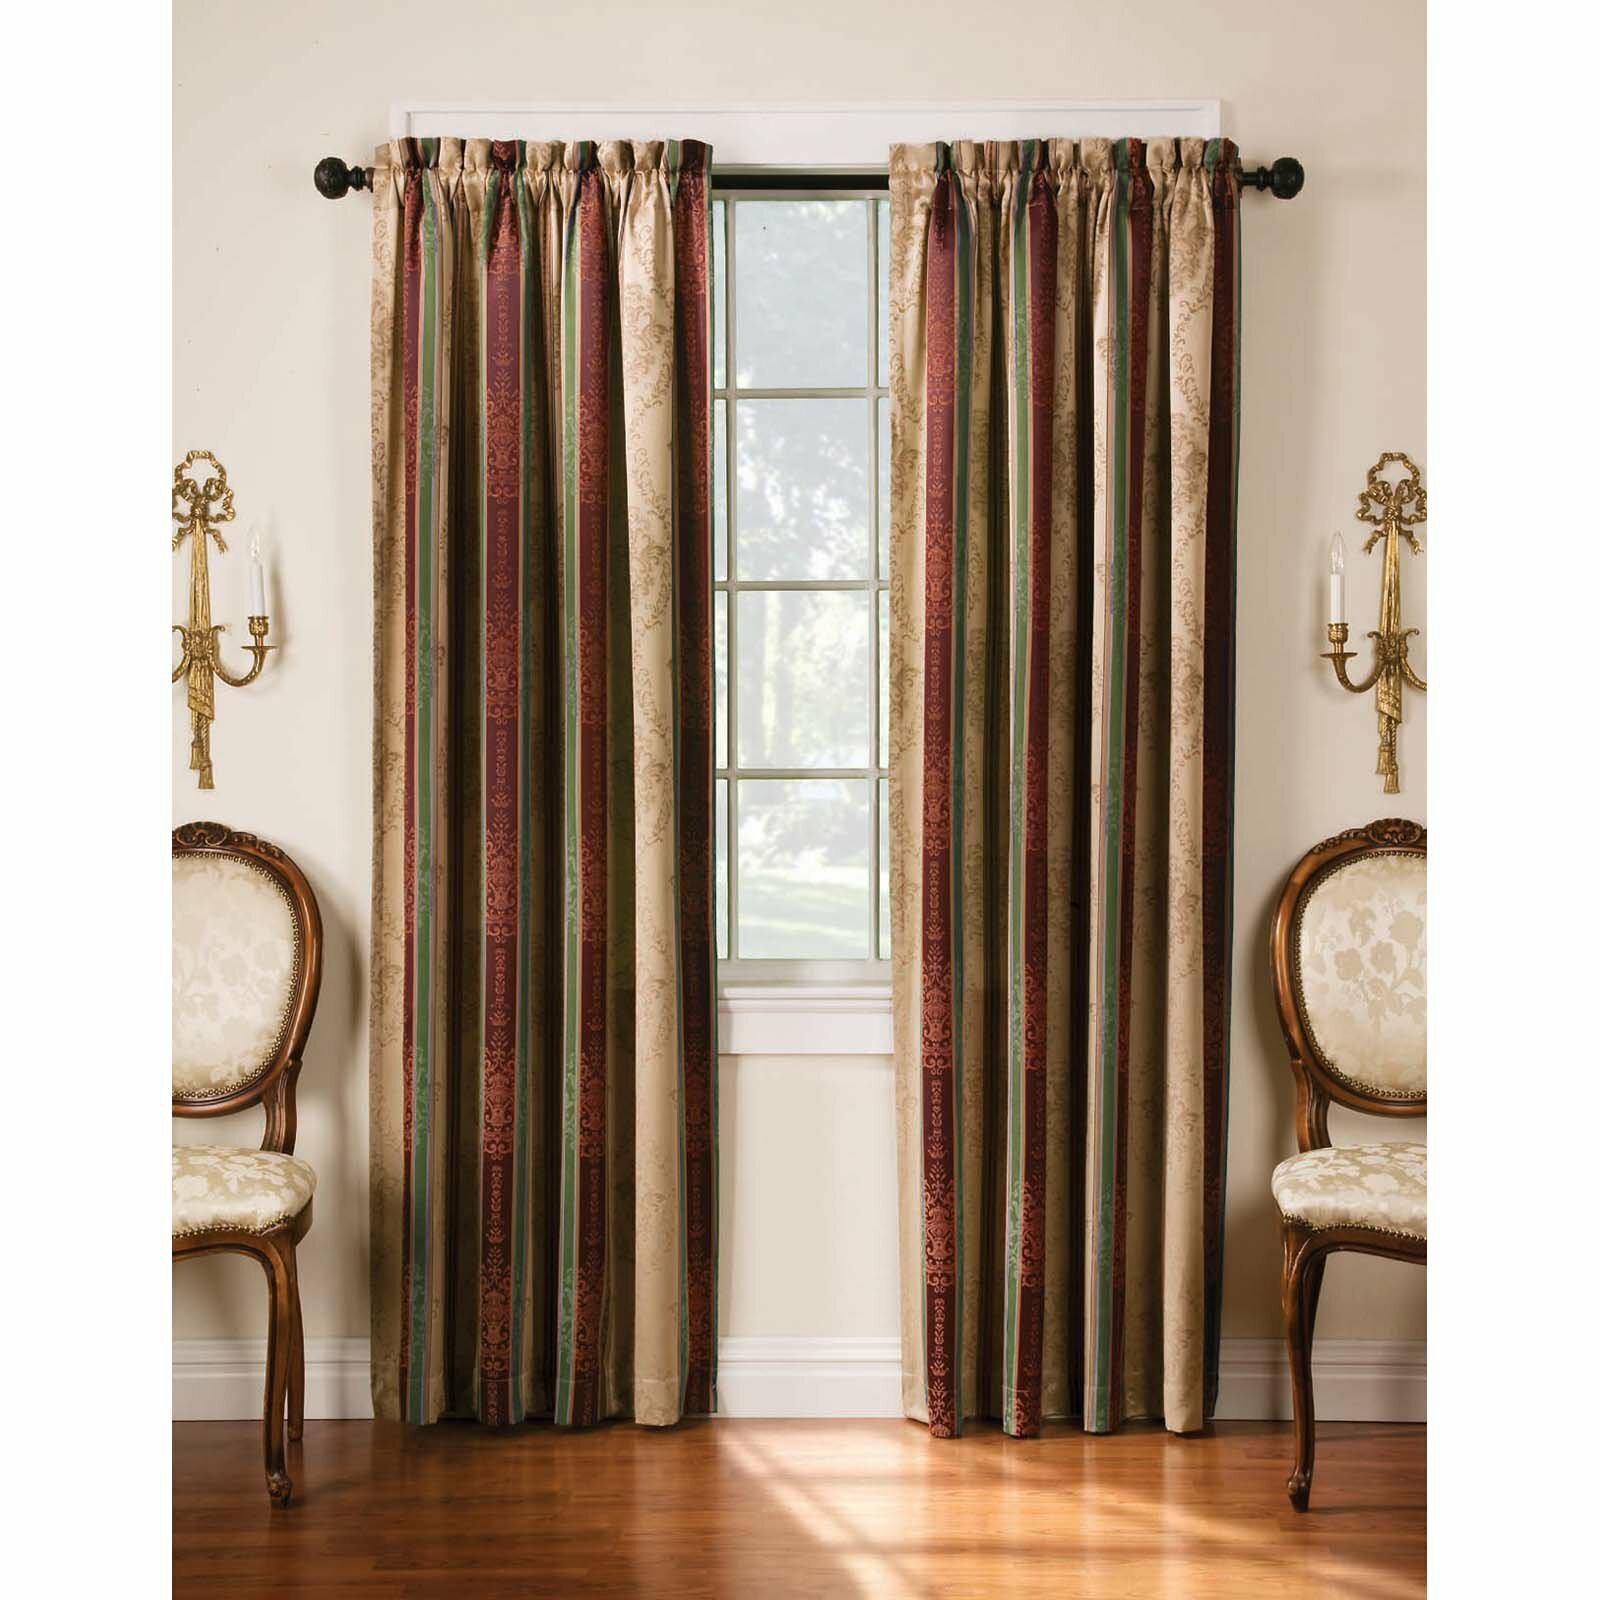 White Light Blocking Curtains | Cheap Blackout Curtains | Drapes with Blackout Lining